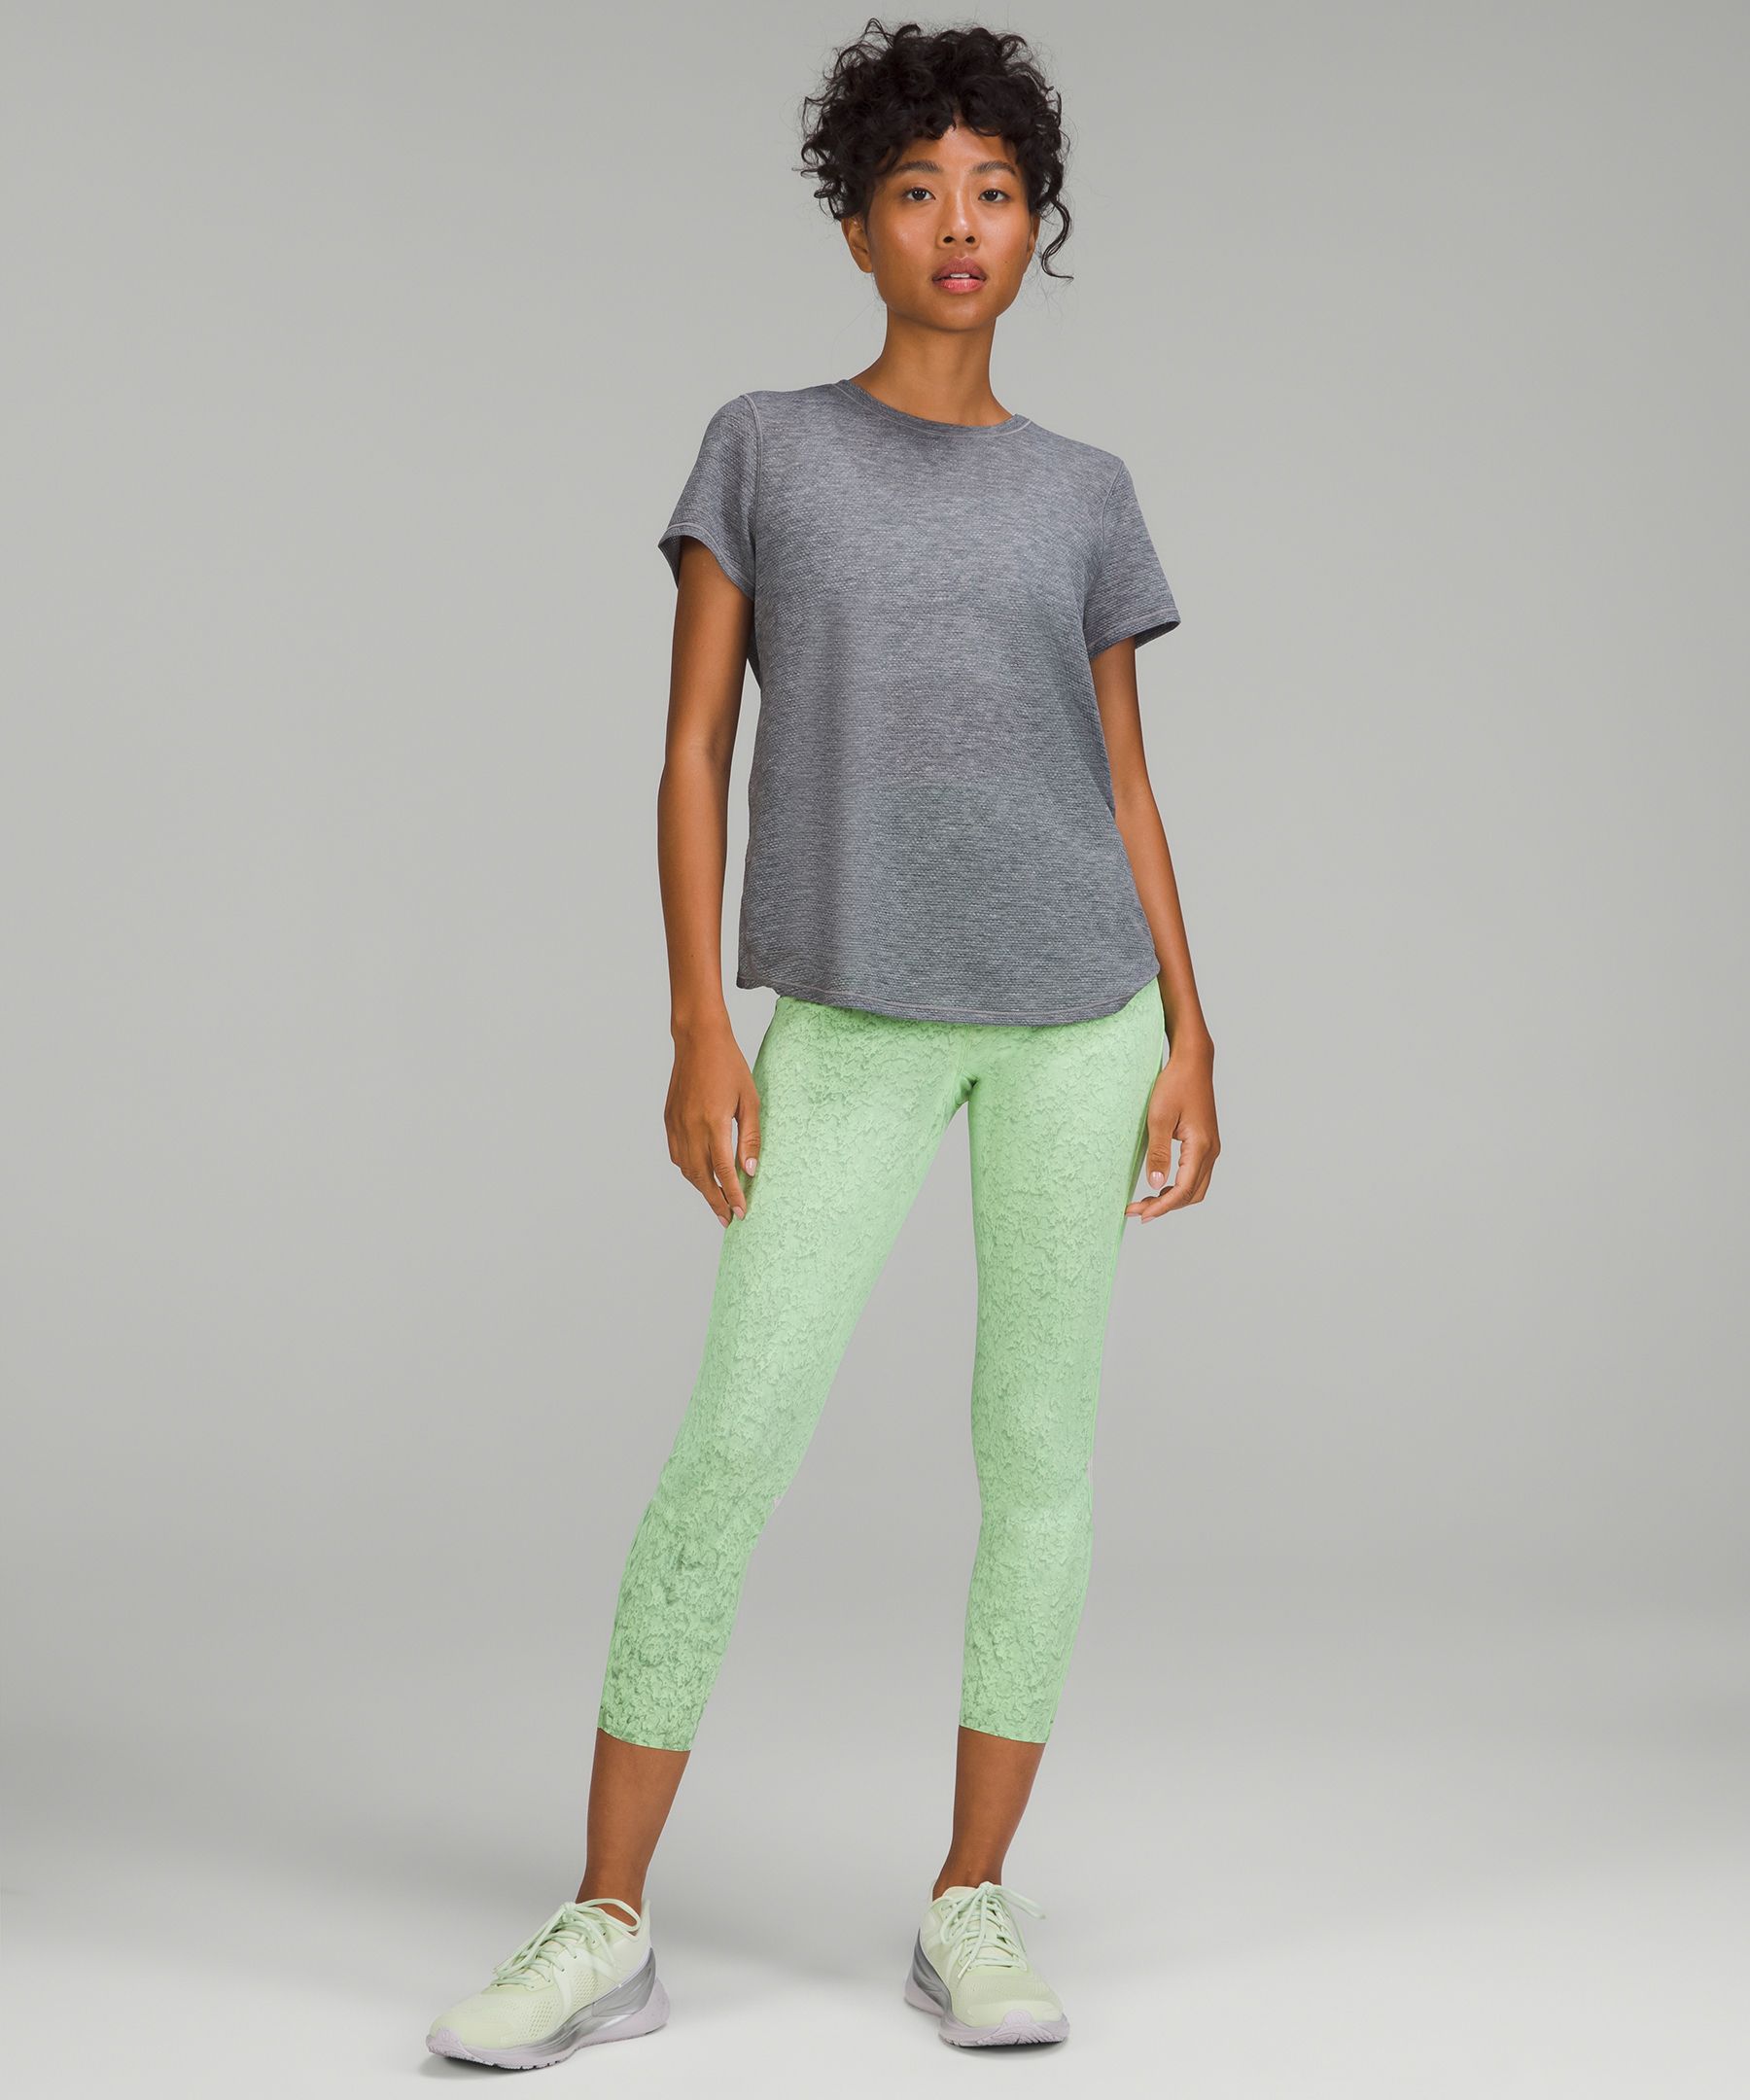 6 Reasons to Buy/Not to Buy LuluLemon Base Pace High-Rise Tight